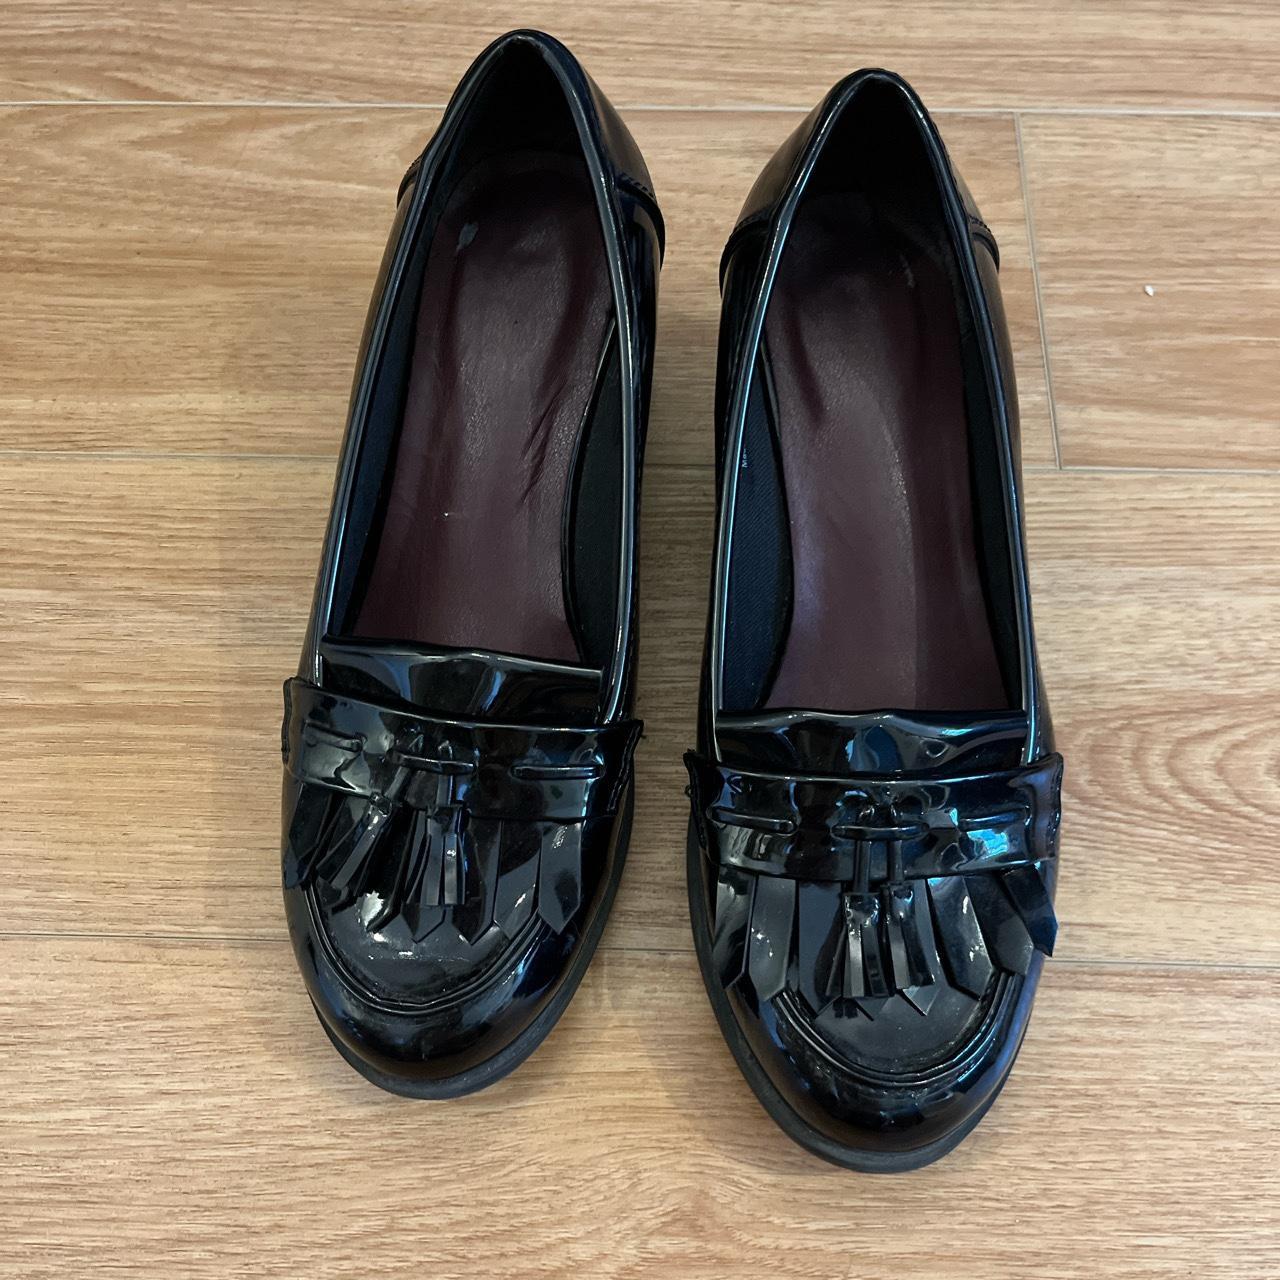 M&S black patent loafer heels. Great condition. Size... - Depop